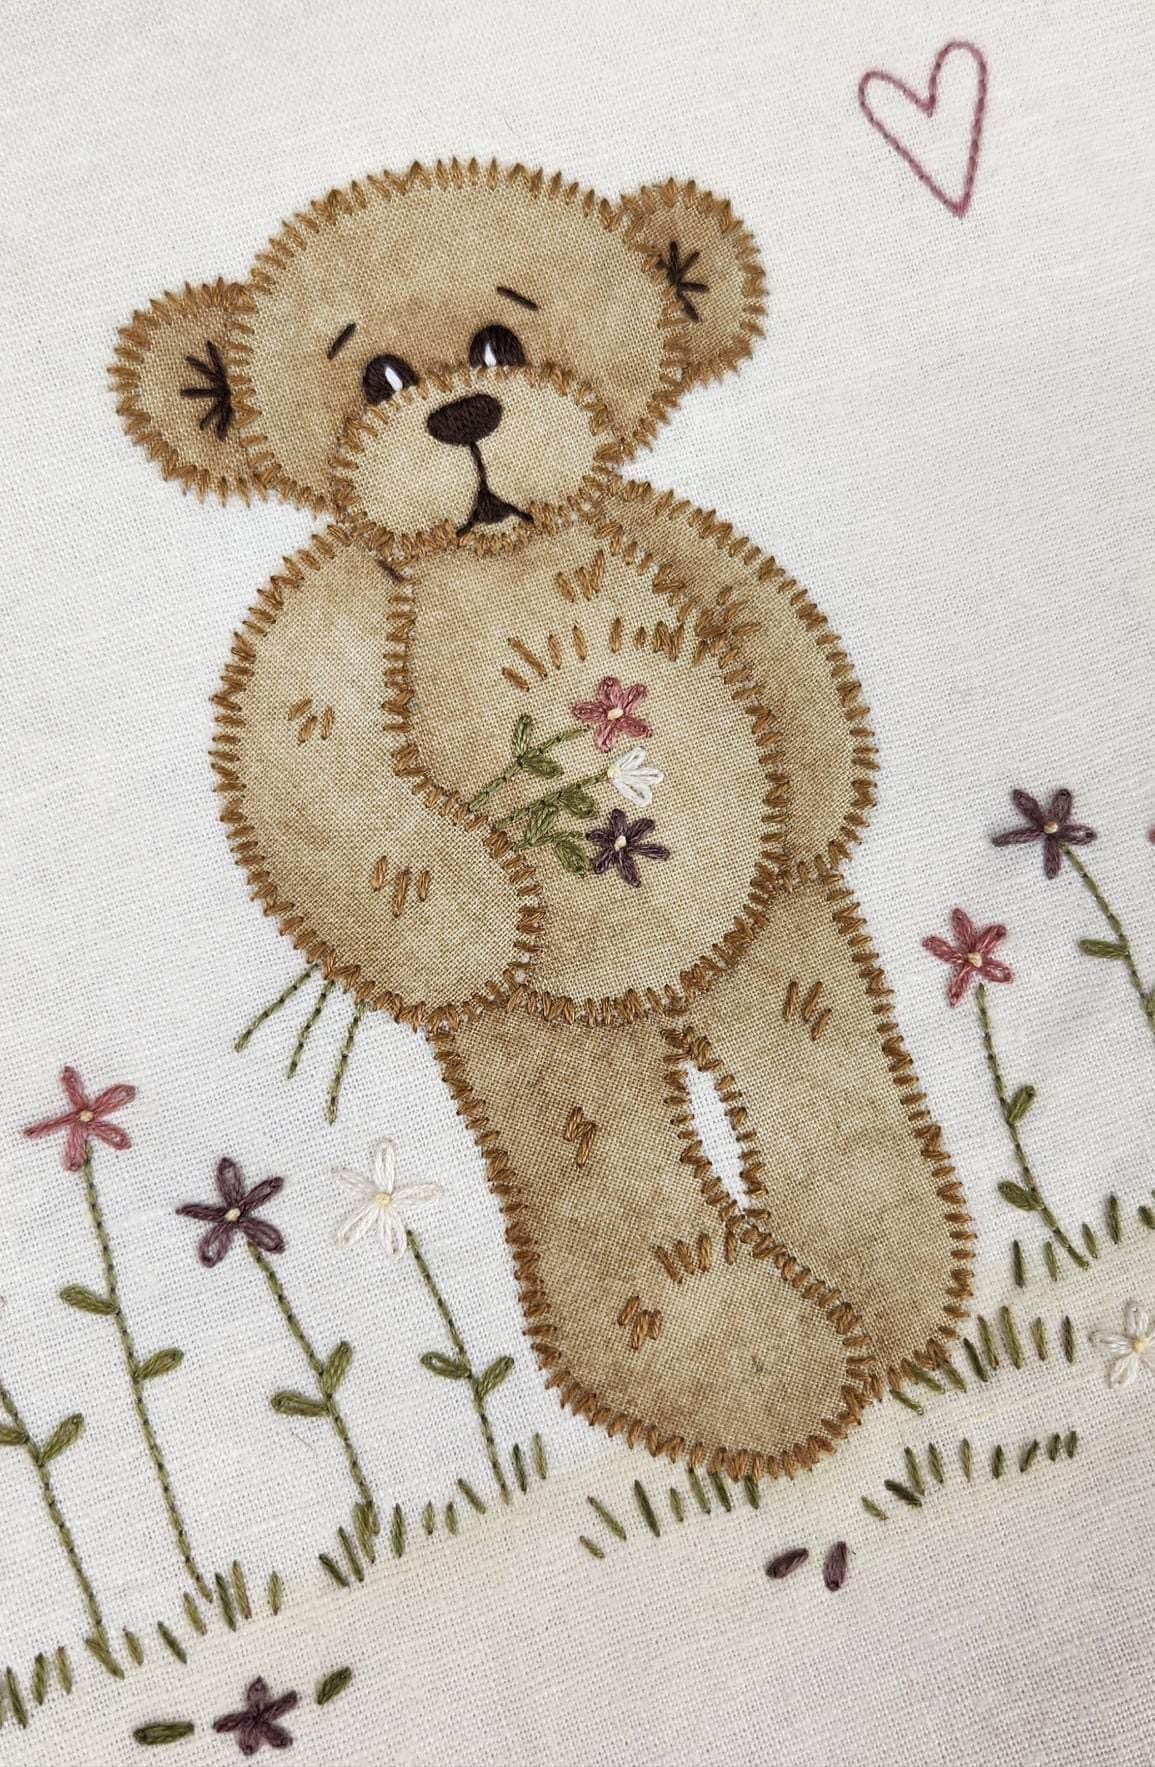 Sew with Love Teddy Club - 10 Month Subscription